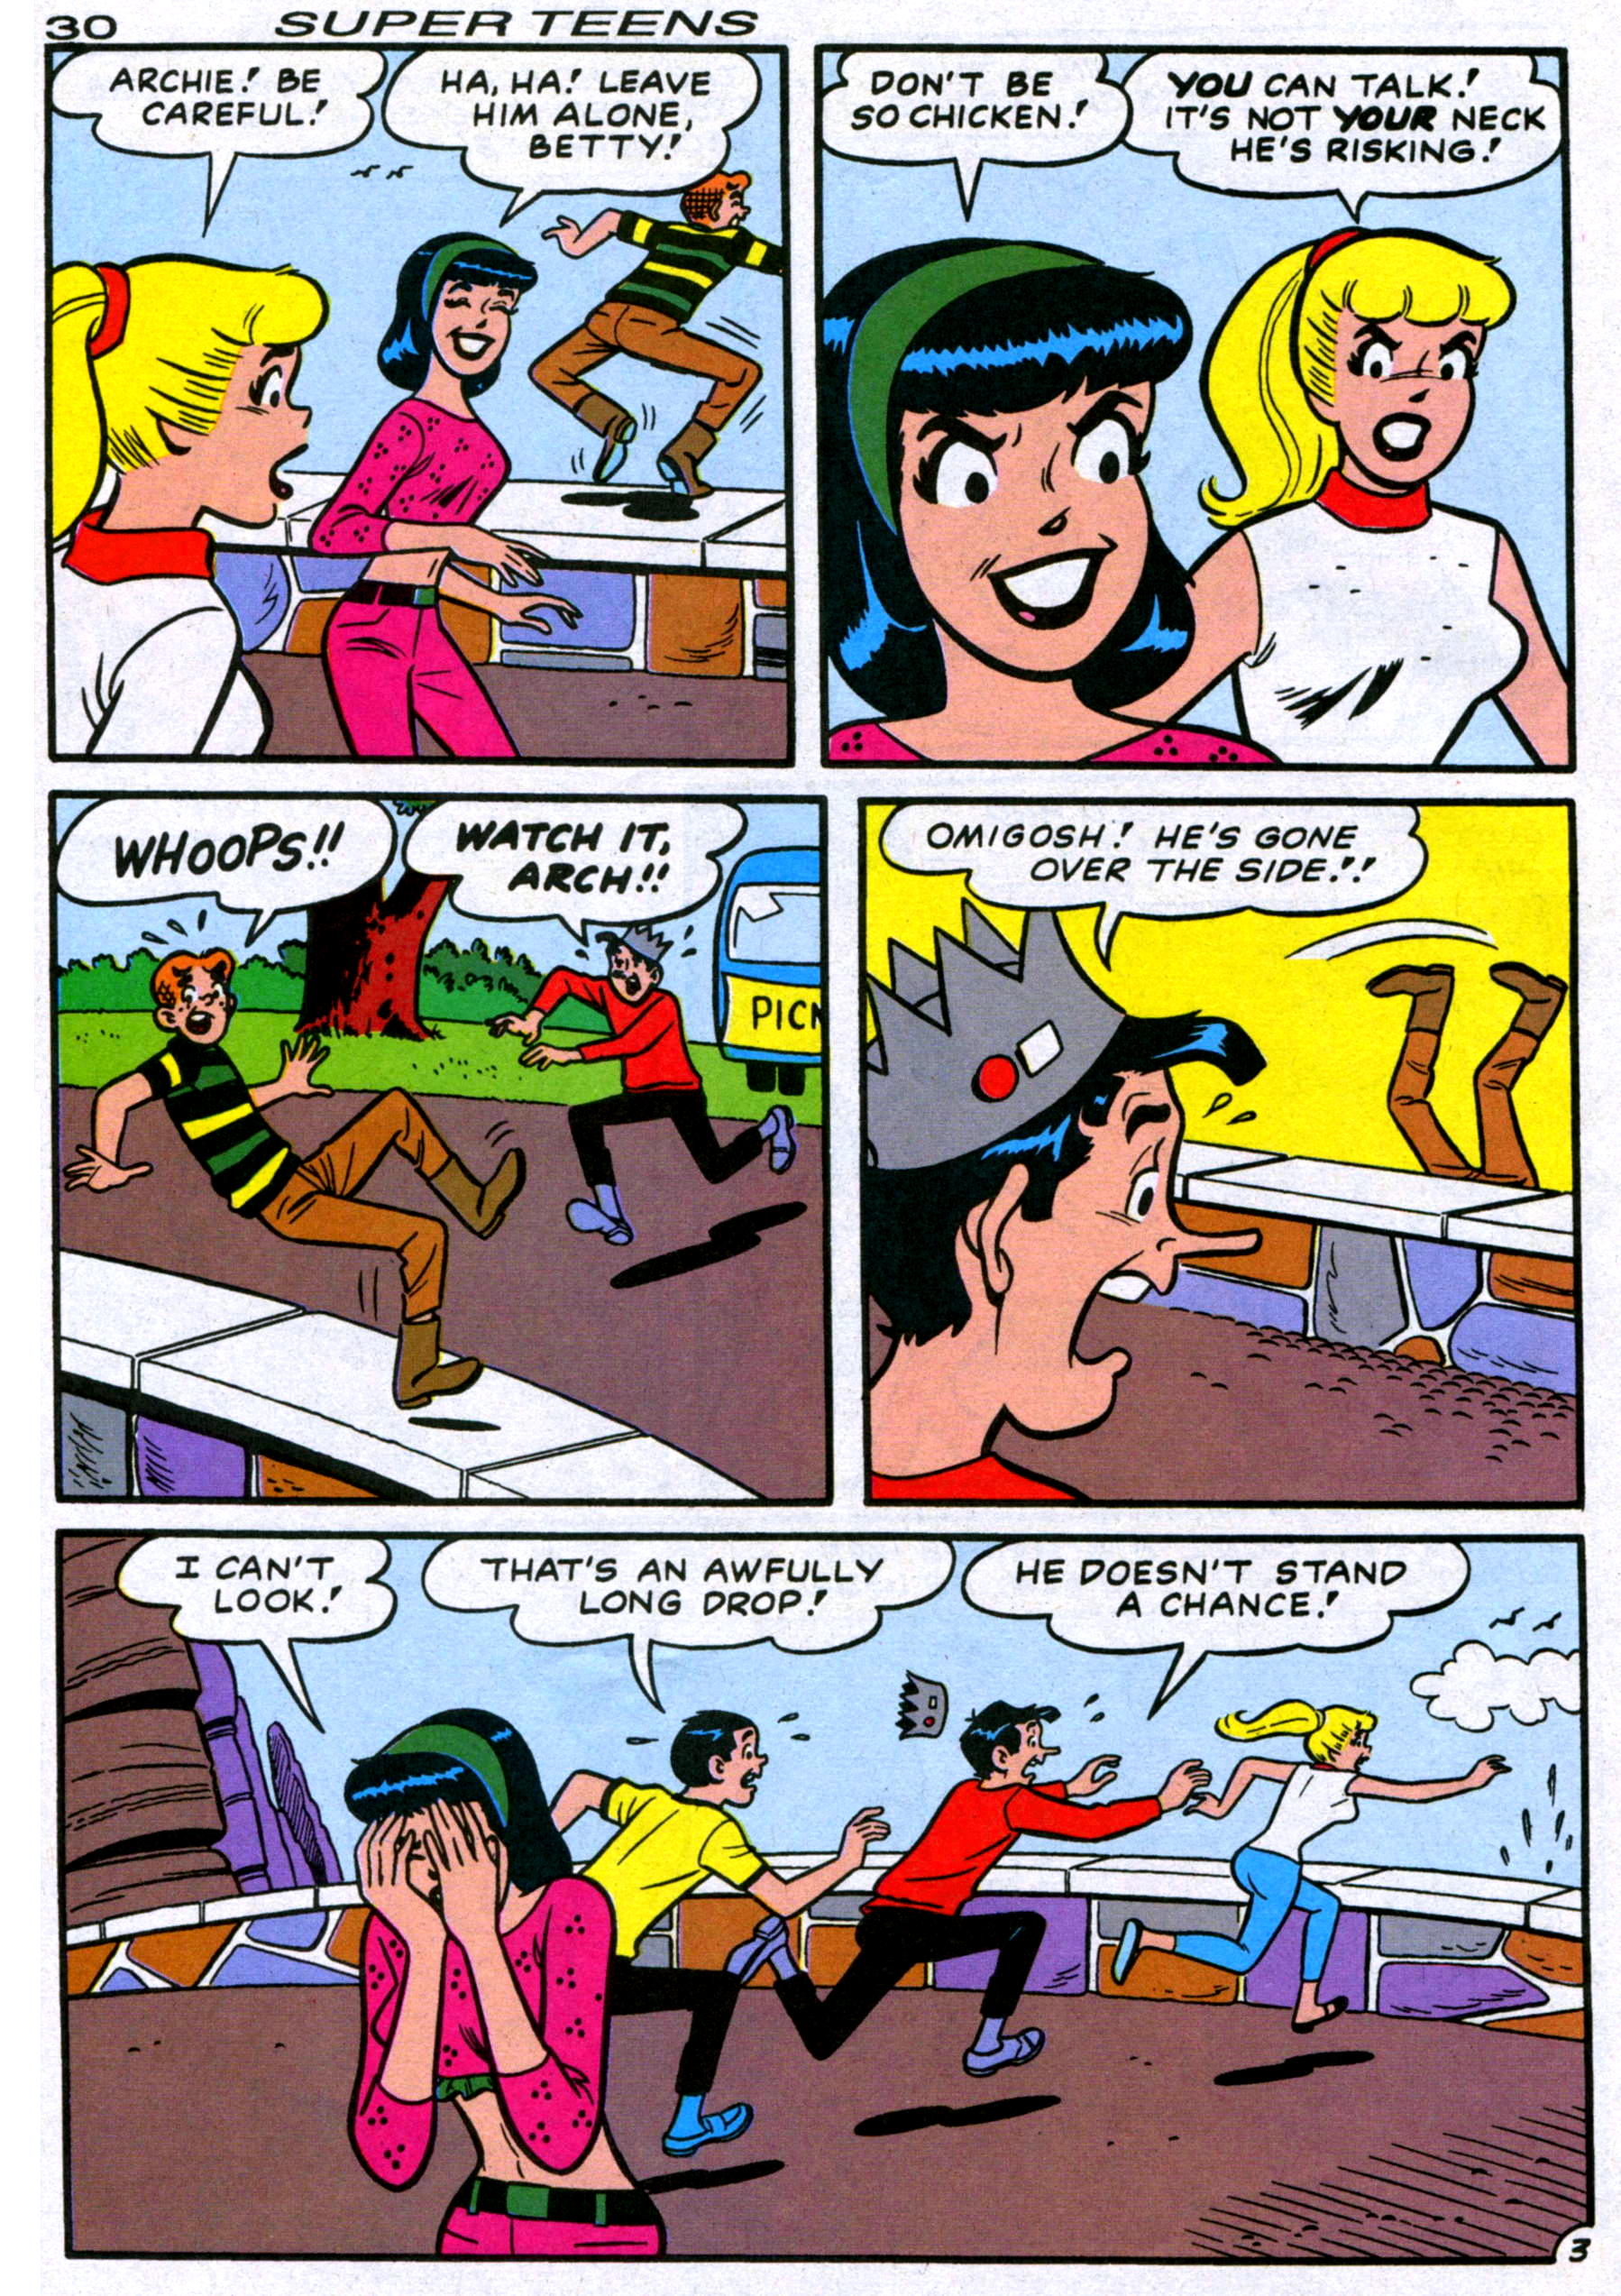 Read online Archie's Super Teens comic -  Issue #1 - 32